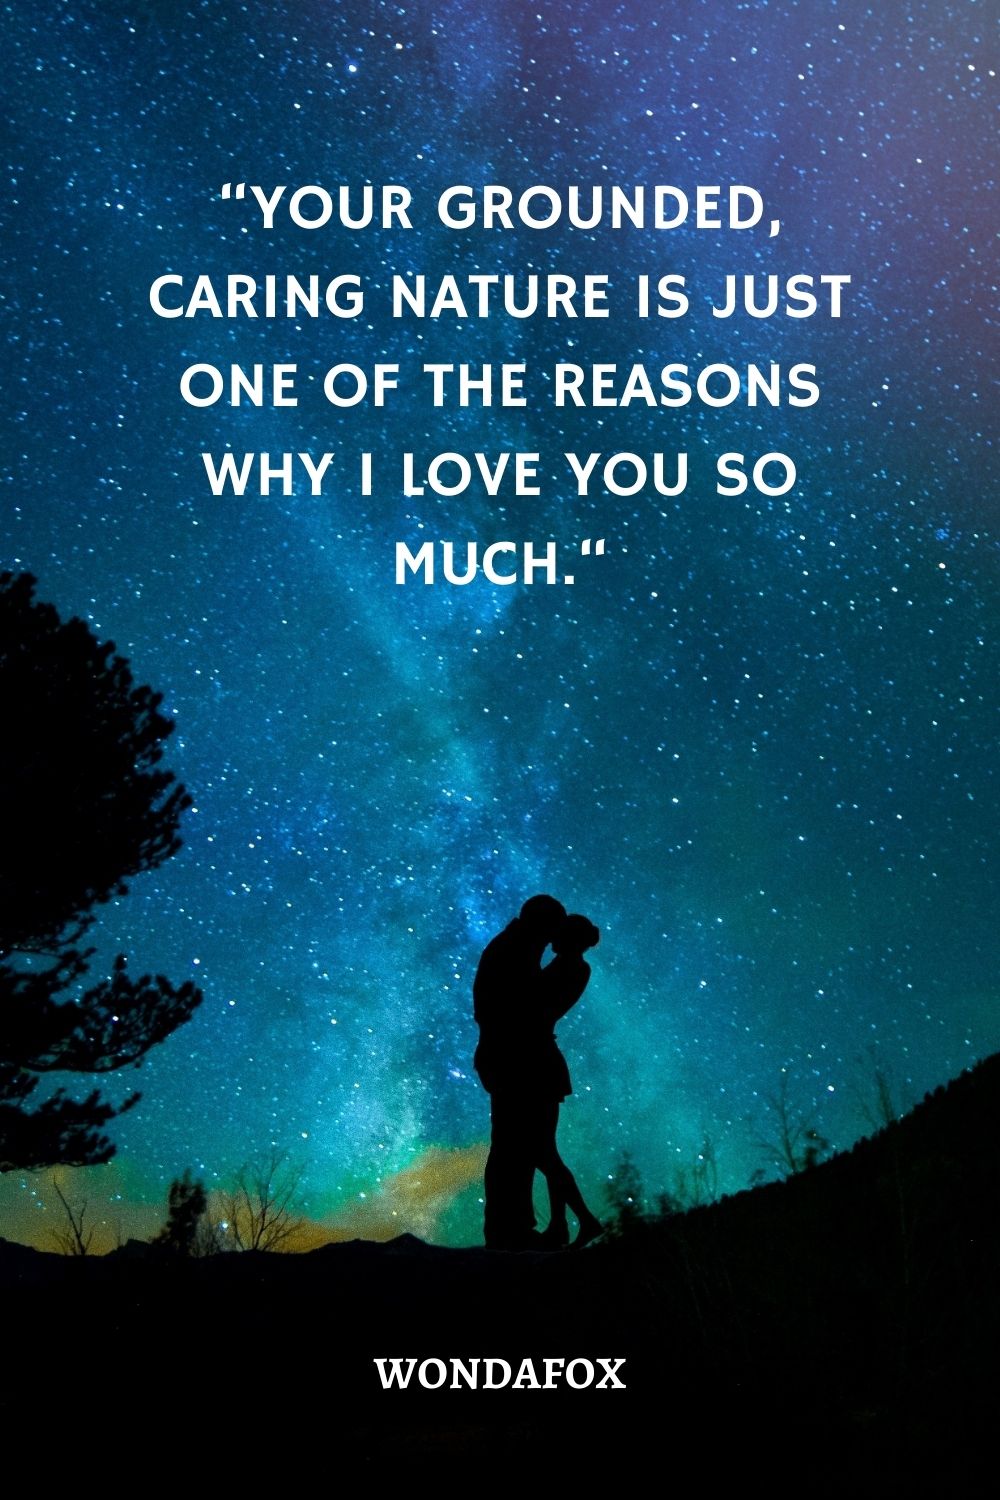 “Your grounded, caring nature is just one of the reasons why I love you so much.“